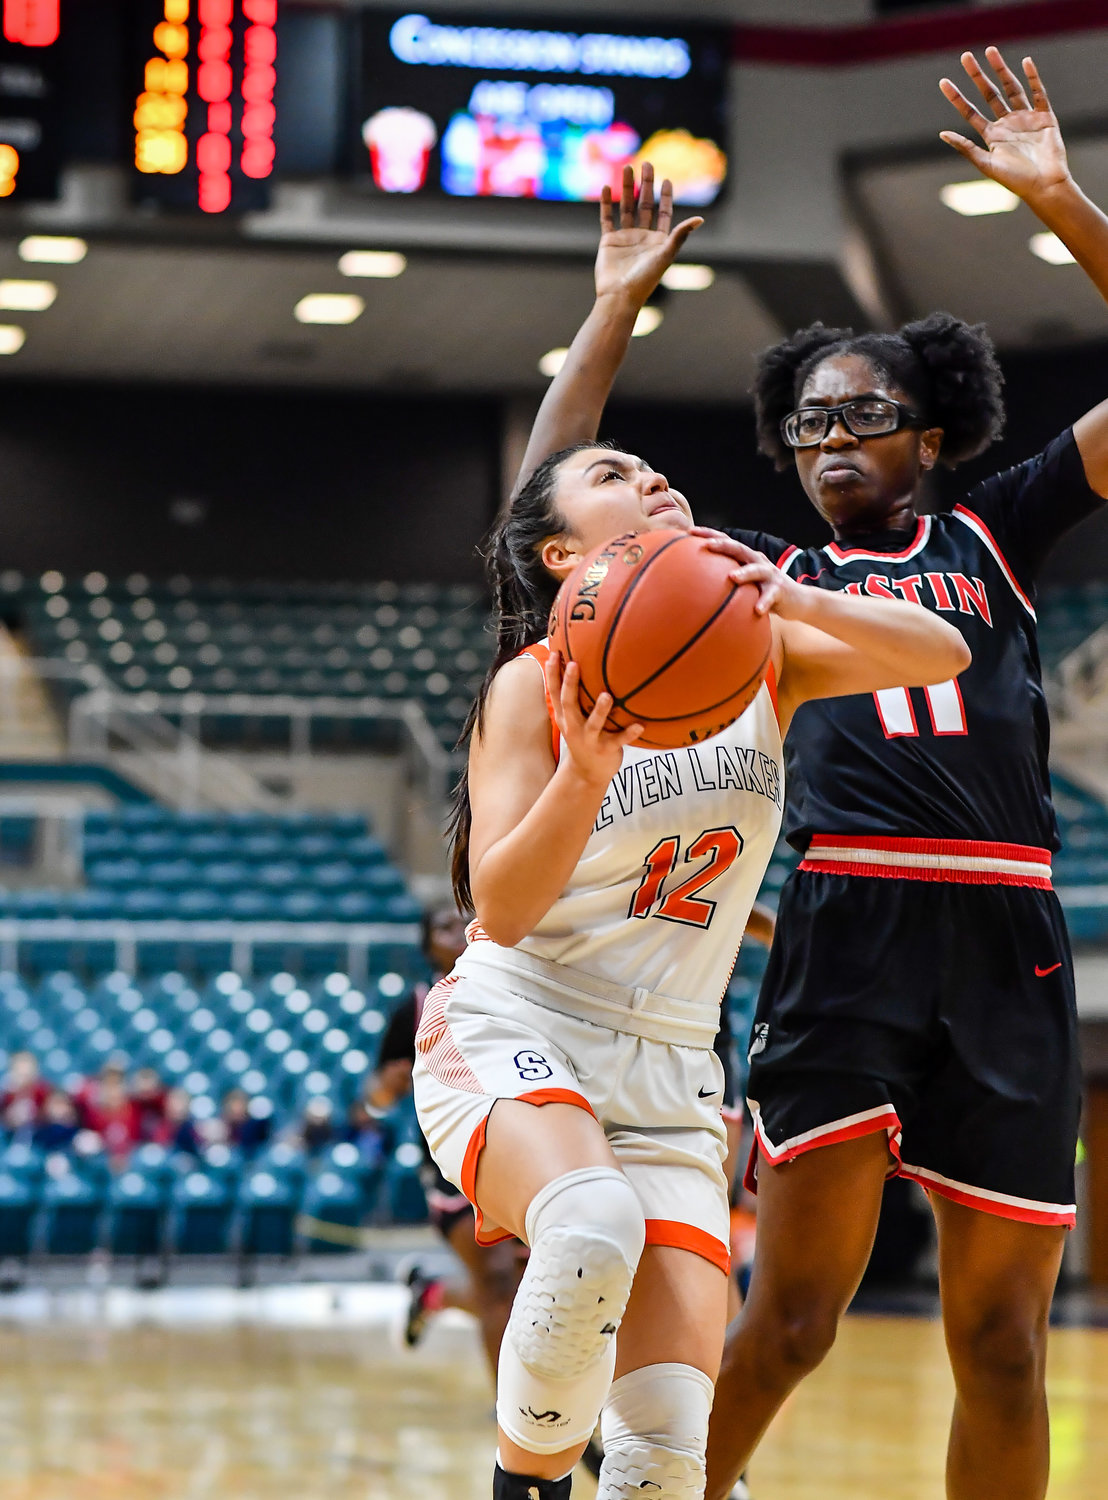 Katy Tx. Feb 22, 2022:  Seven Lakes Cailyn Tucker #12 drives to the basket scoring for the Spartans during the Regional Quarterfinal playoff game, Seven Lakes vs Fort Bend Austin at the Merrell Center. (Photo by Mark Goodman / Katy Times)